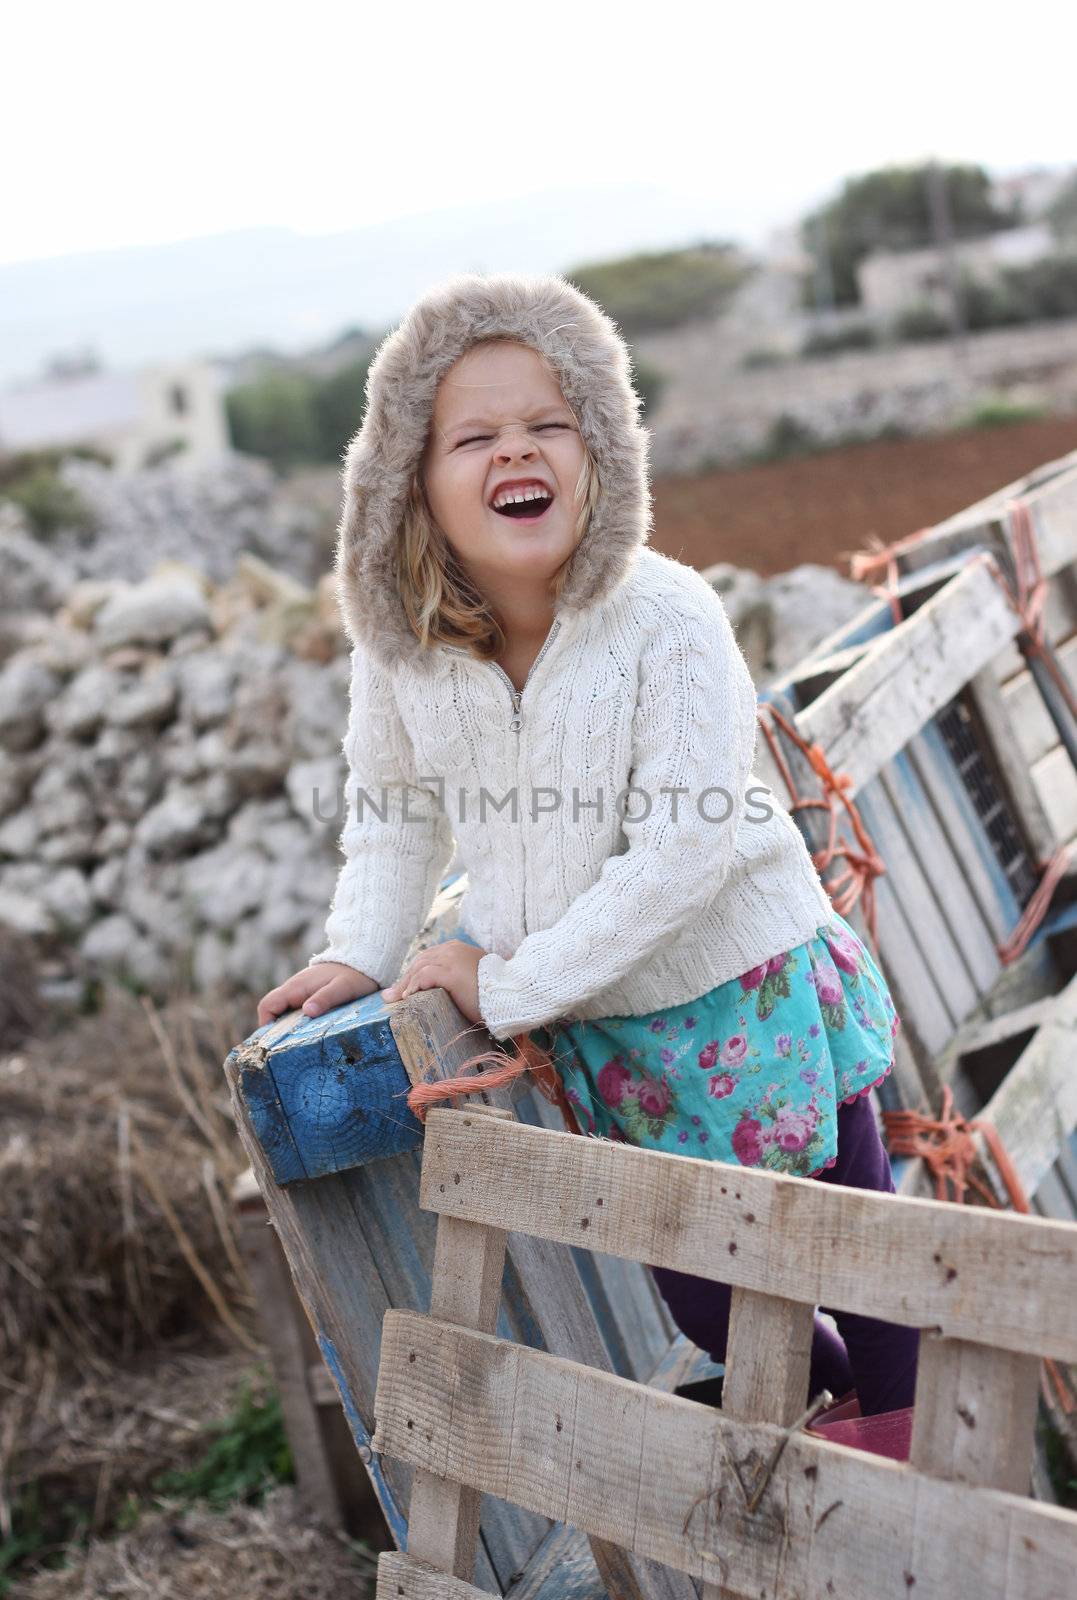 Little girl with a hood doing a silly face